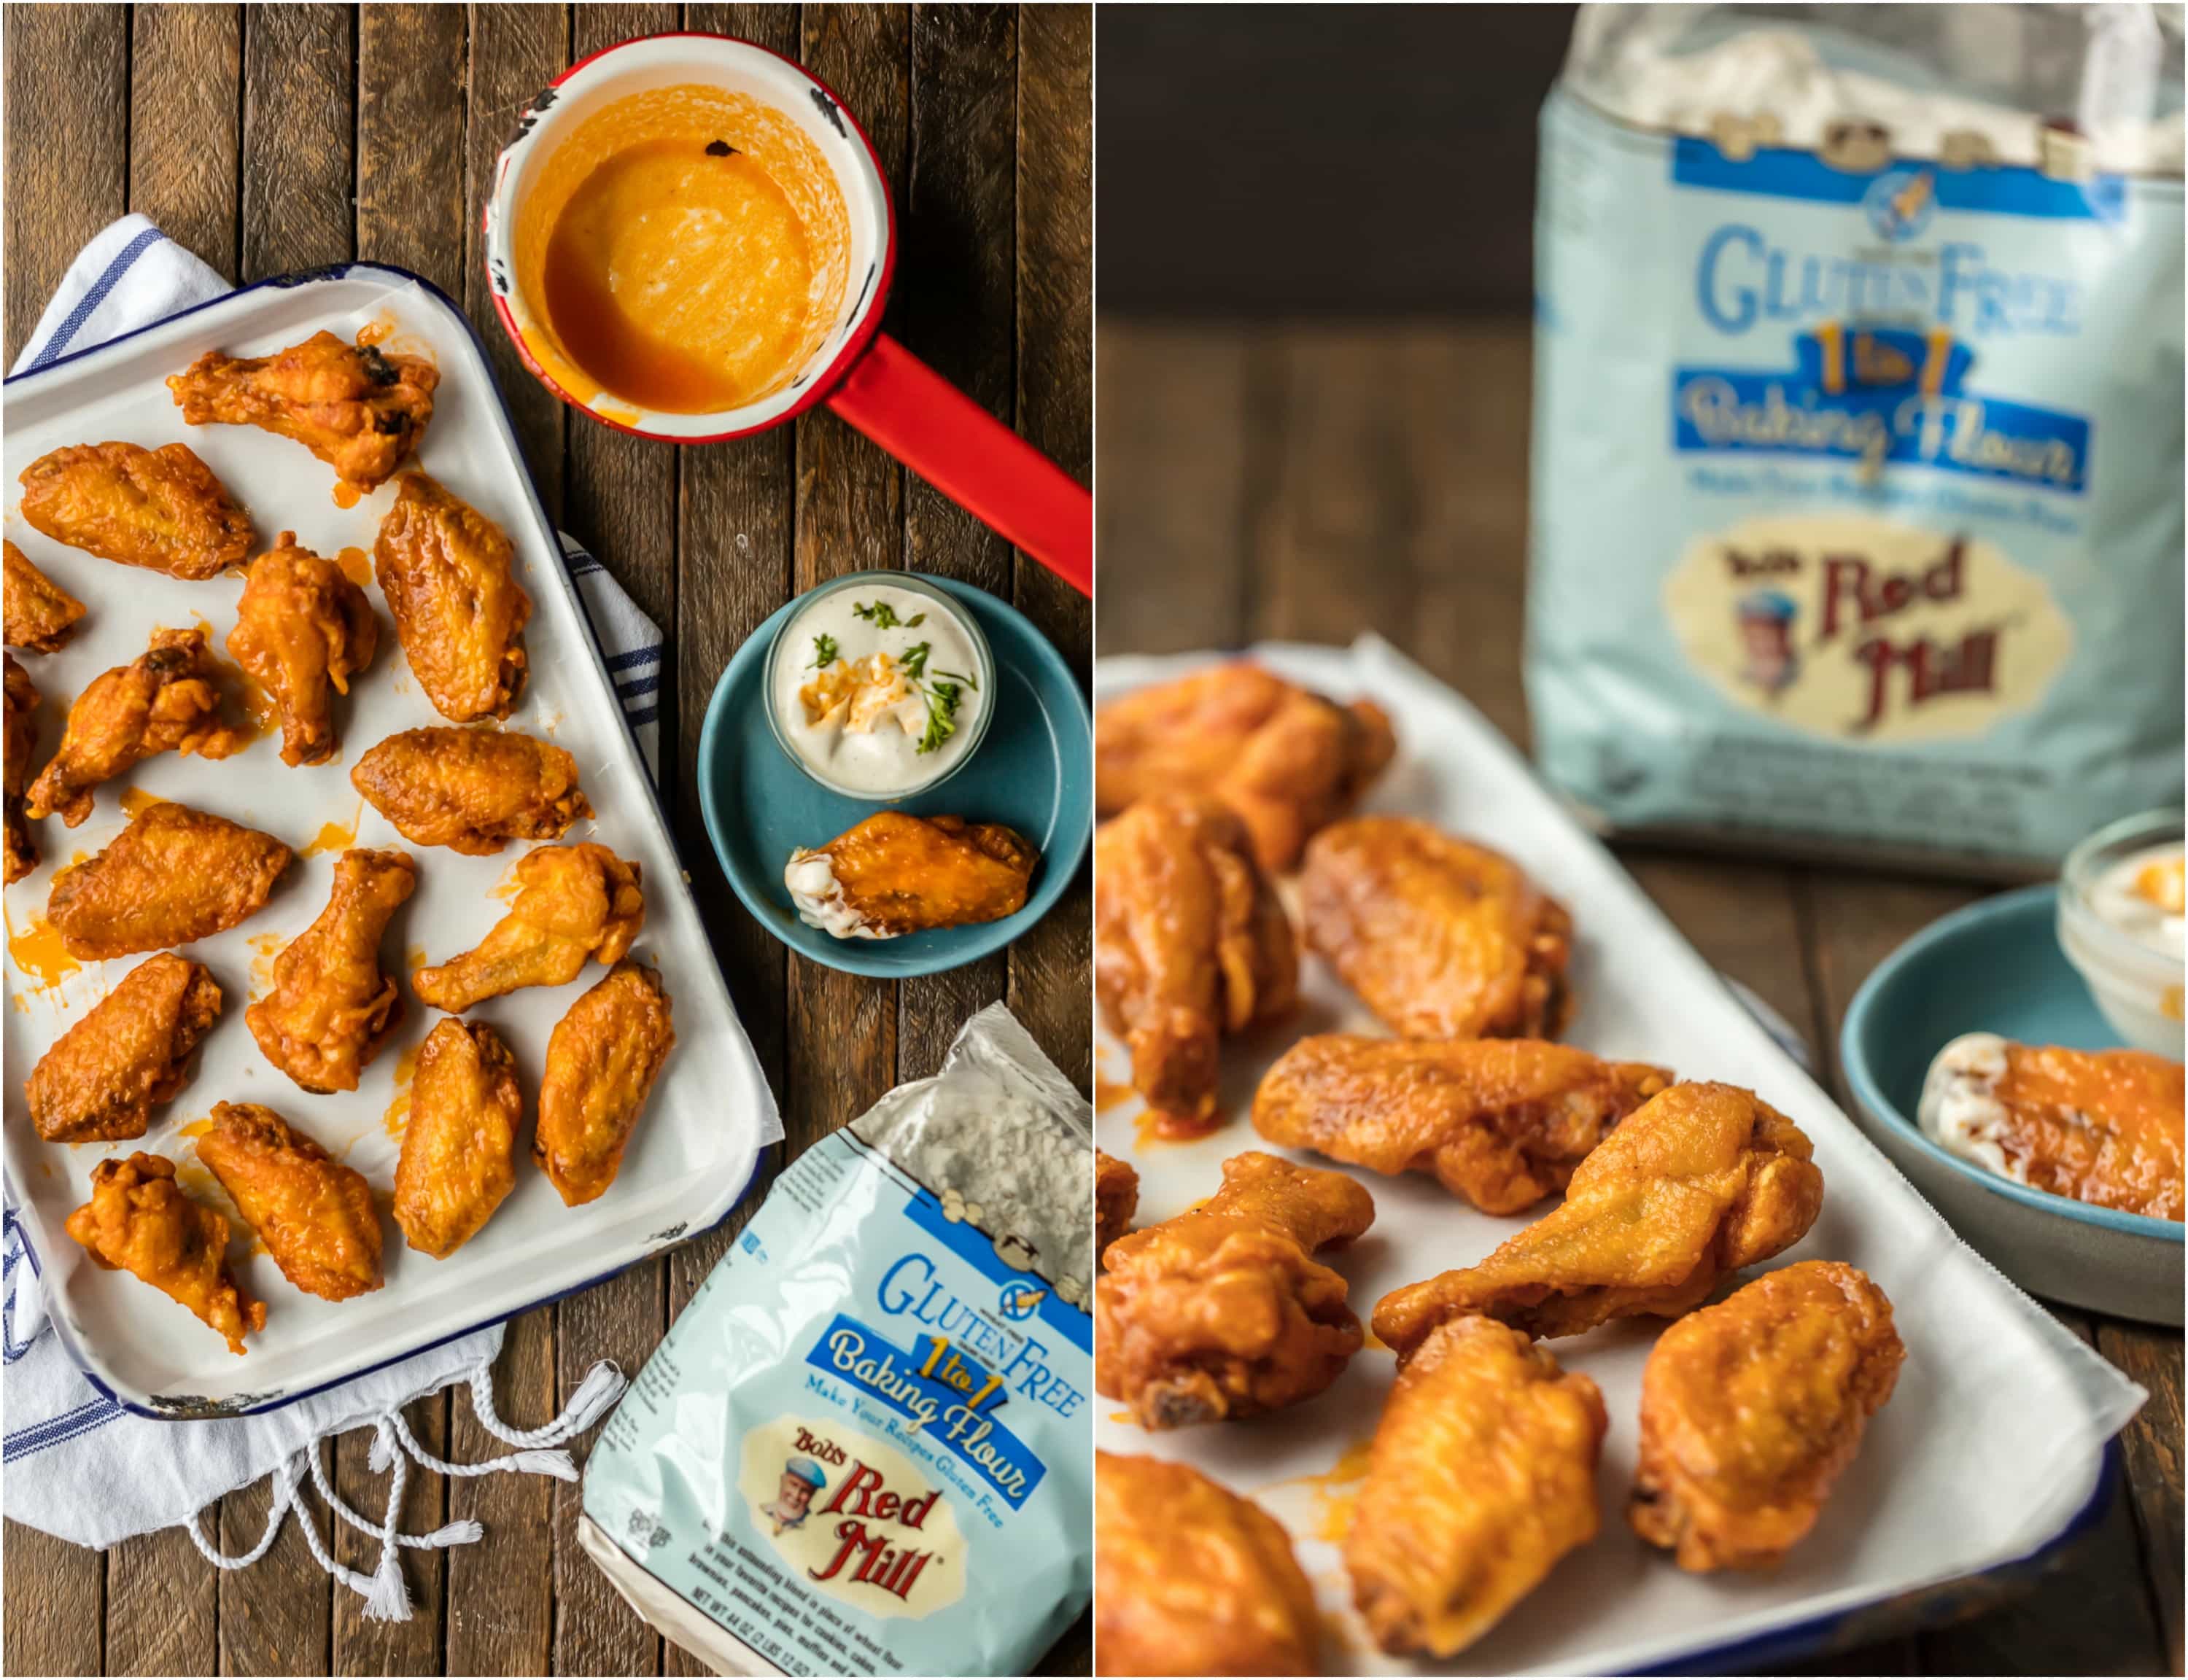 The BEST FRIED BUFFALO WINGS that just so happen to be GLUTEN FREE! Spicy deep fried buffalo chicken wings perfect for tailgating, the Super Bowl, and every day in between!